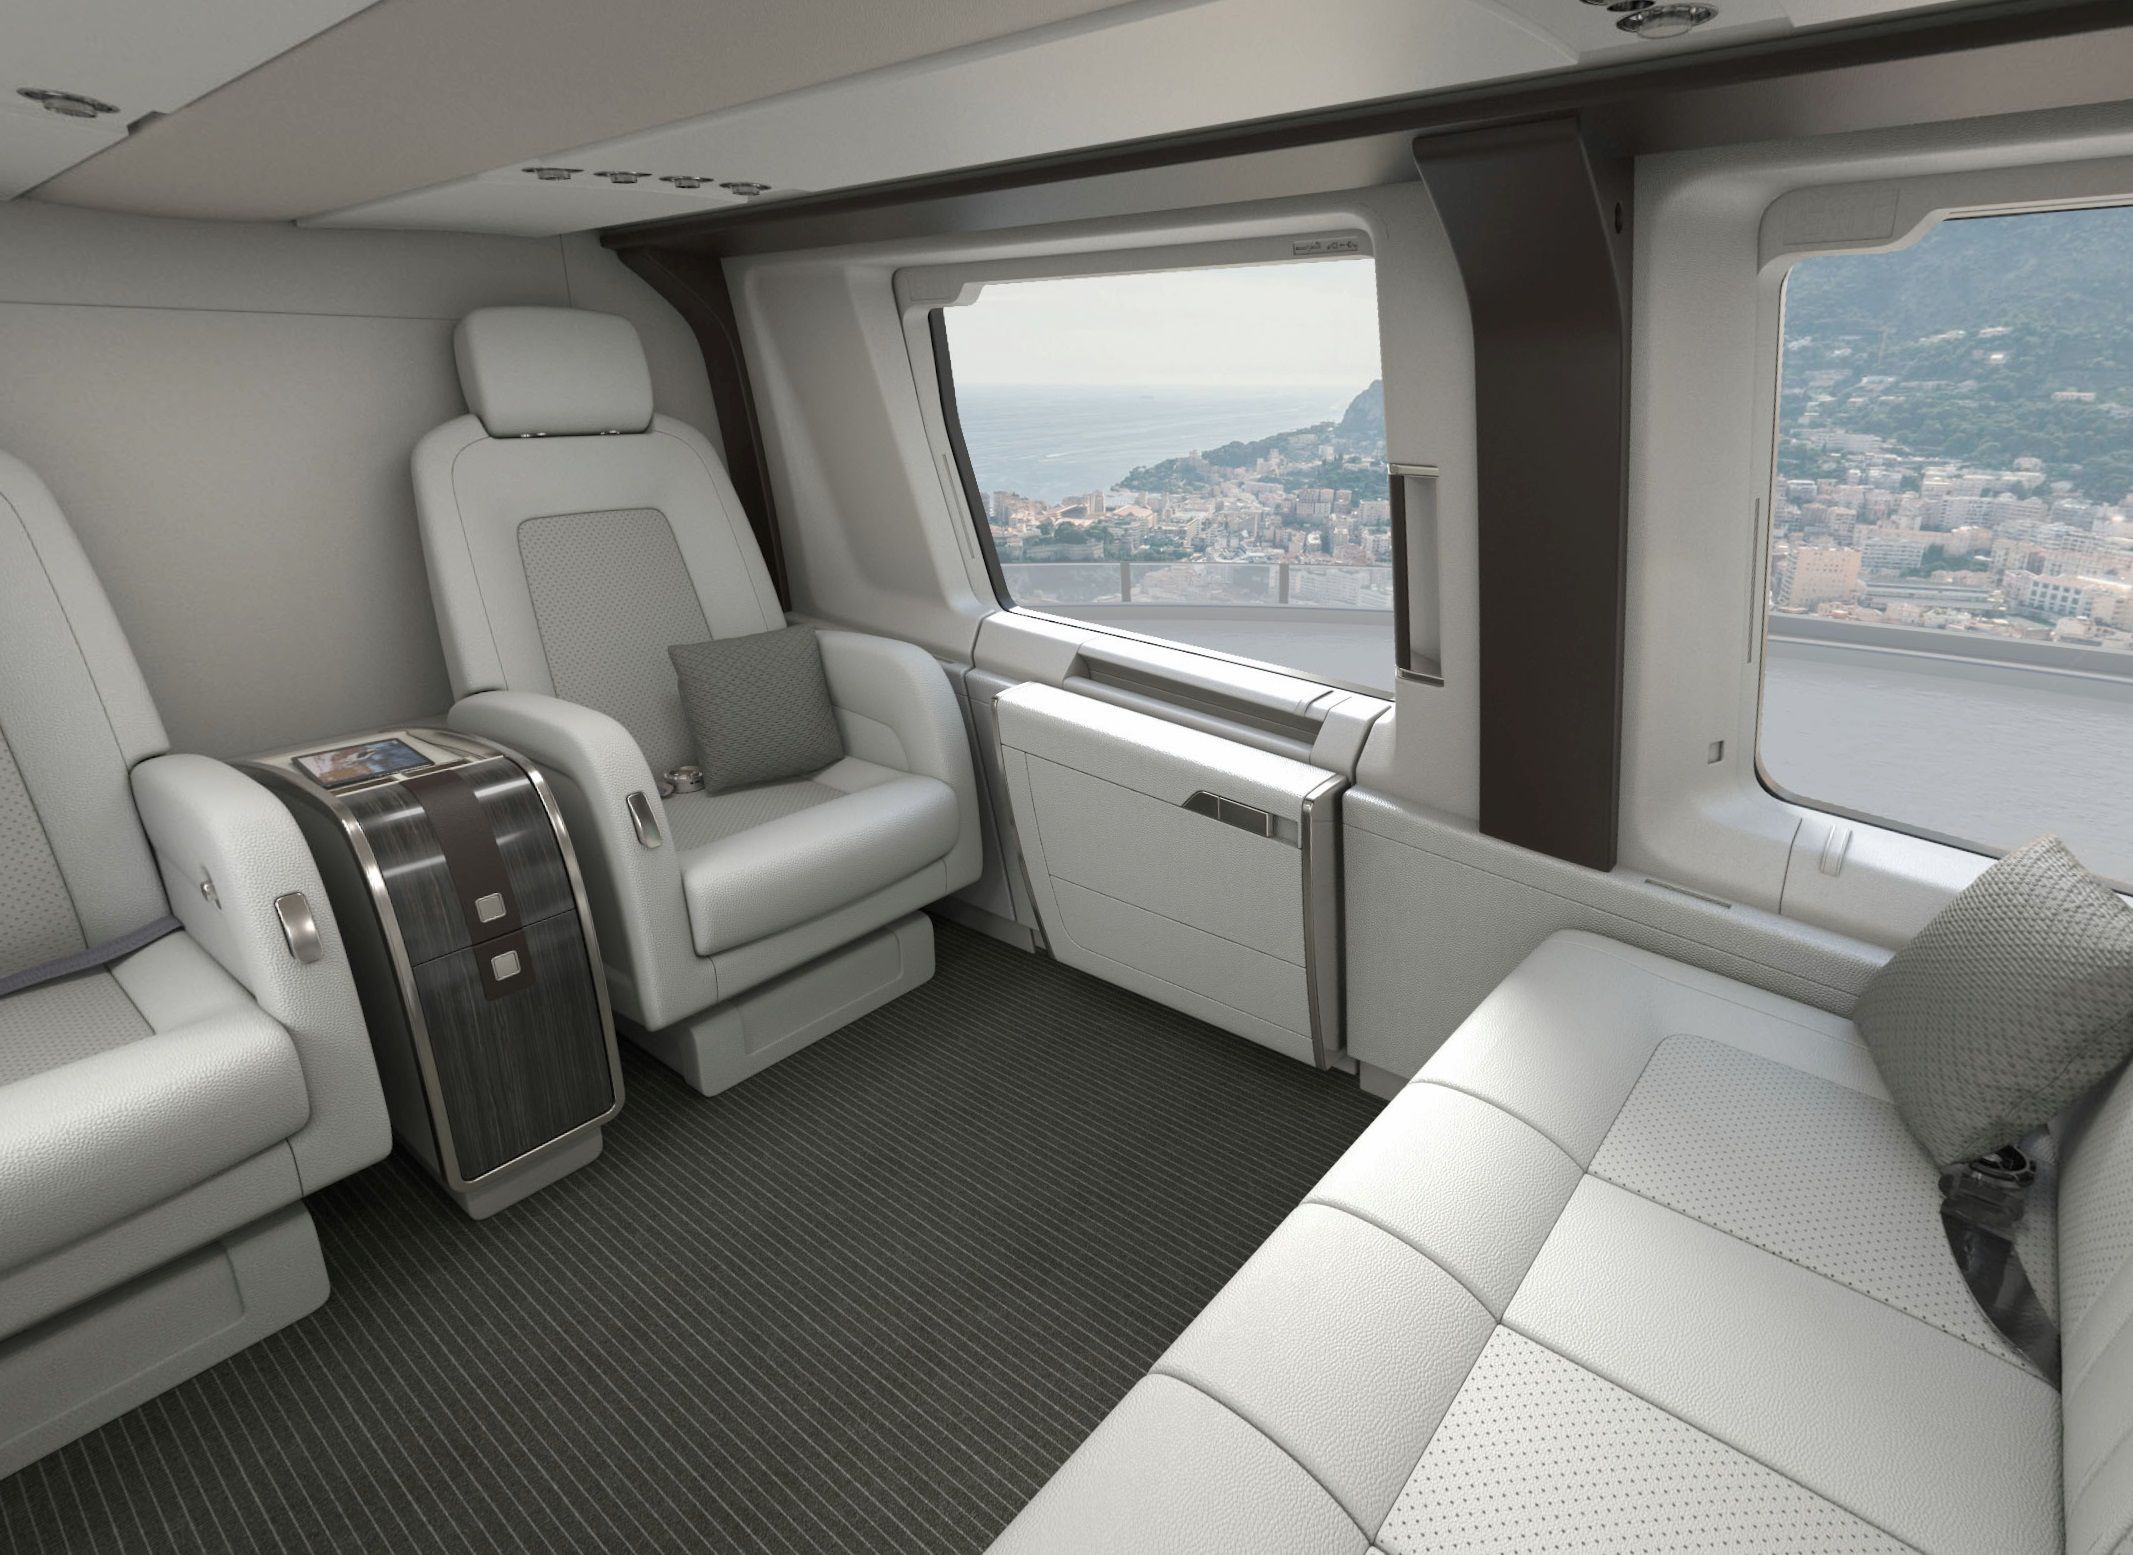 The Italian client, an existing twin-engine ACH operator, has specified a customised interior configured for six passengers. Click to enlarge.